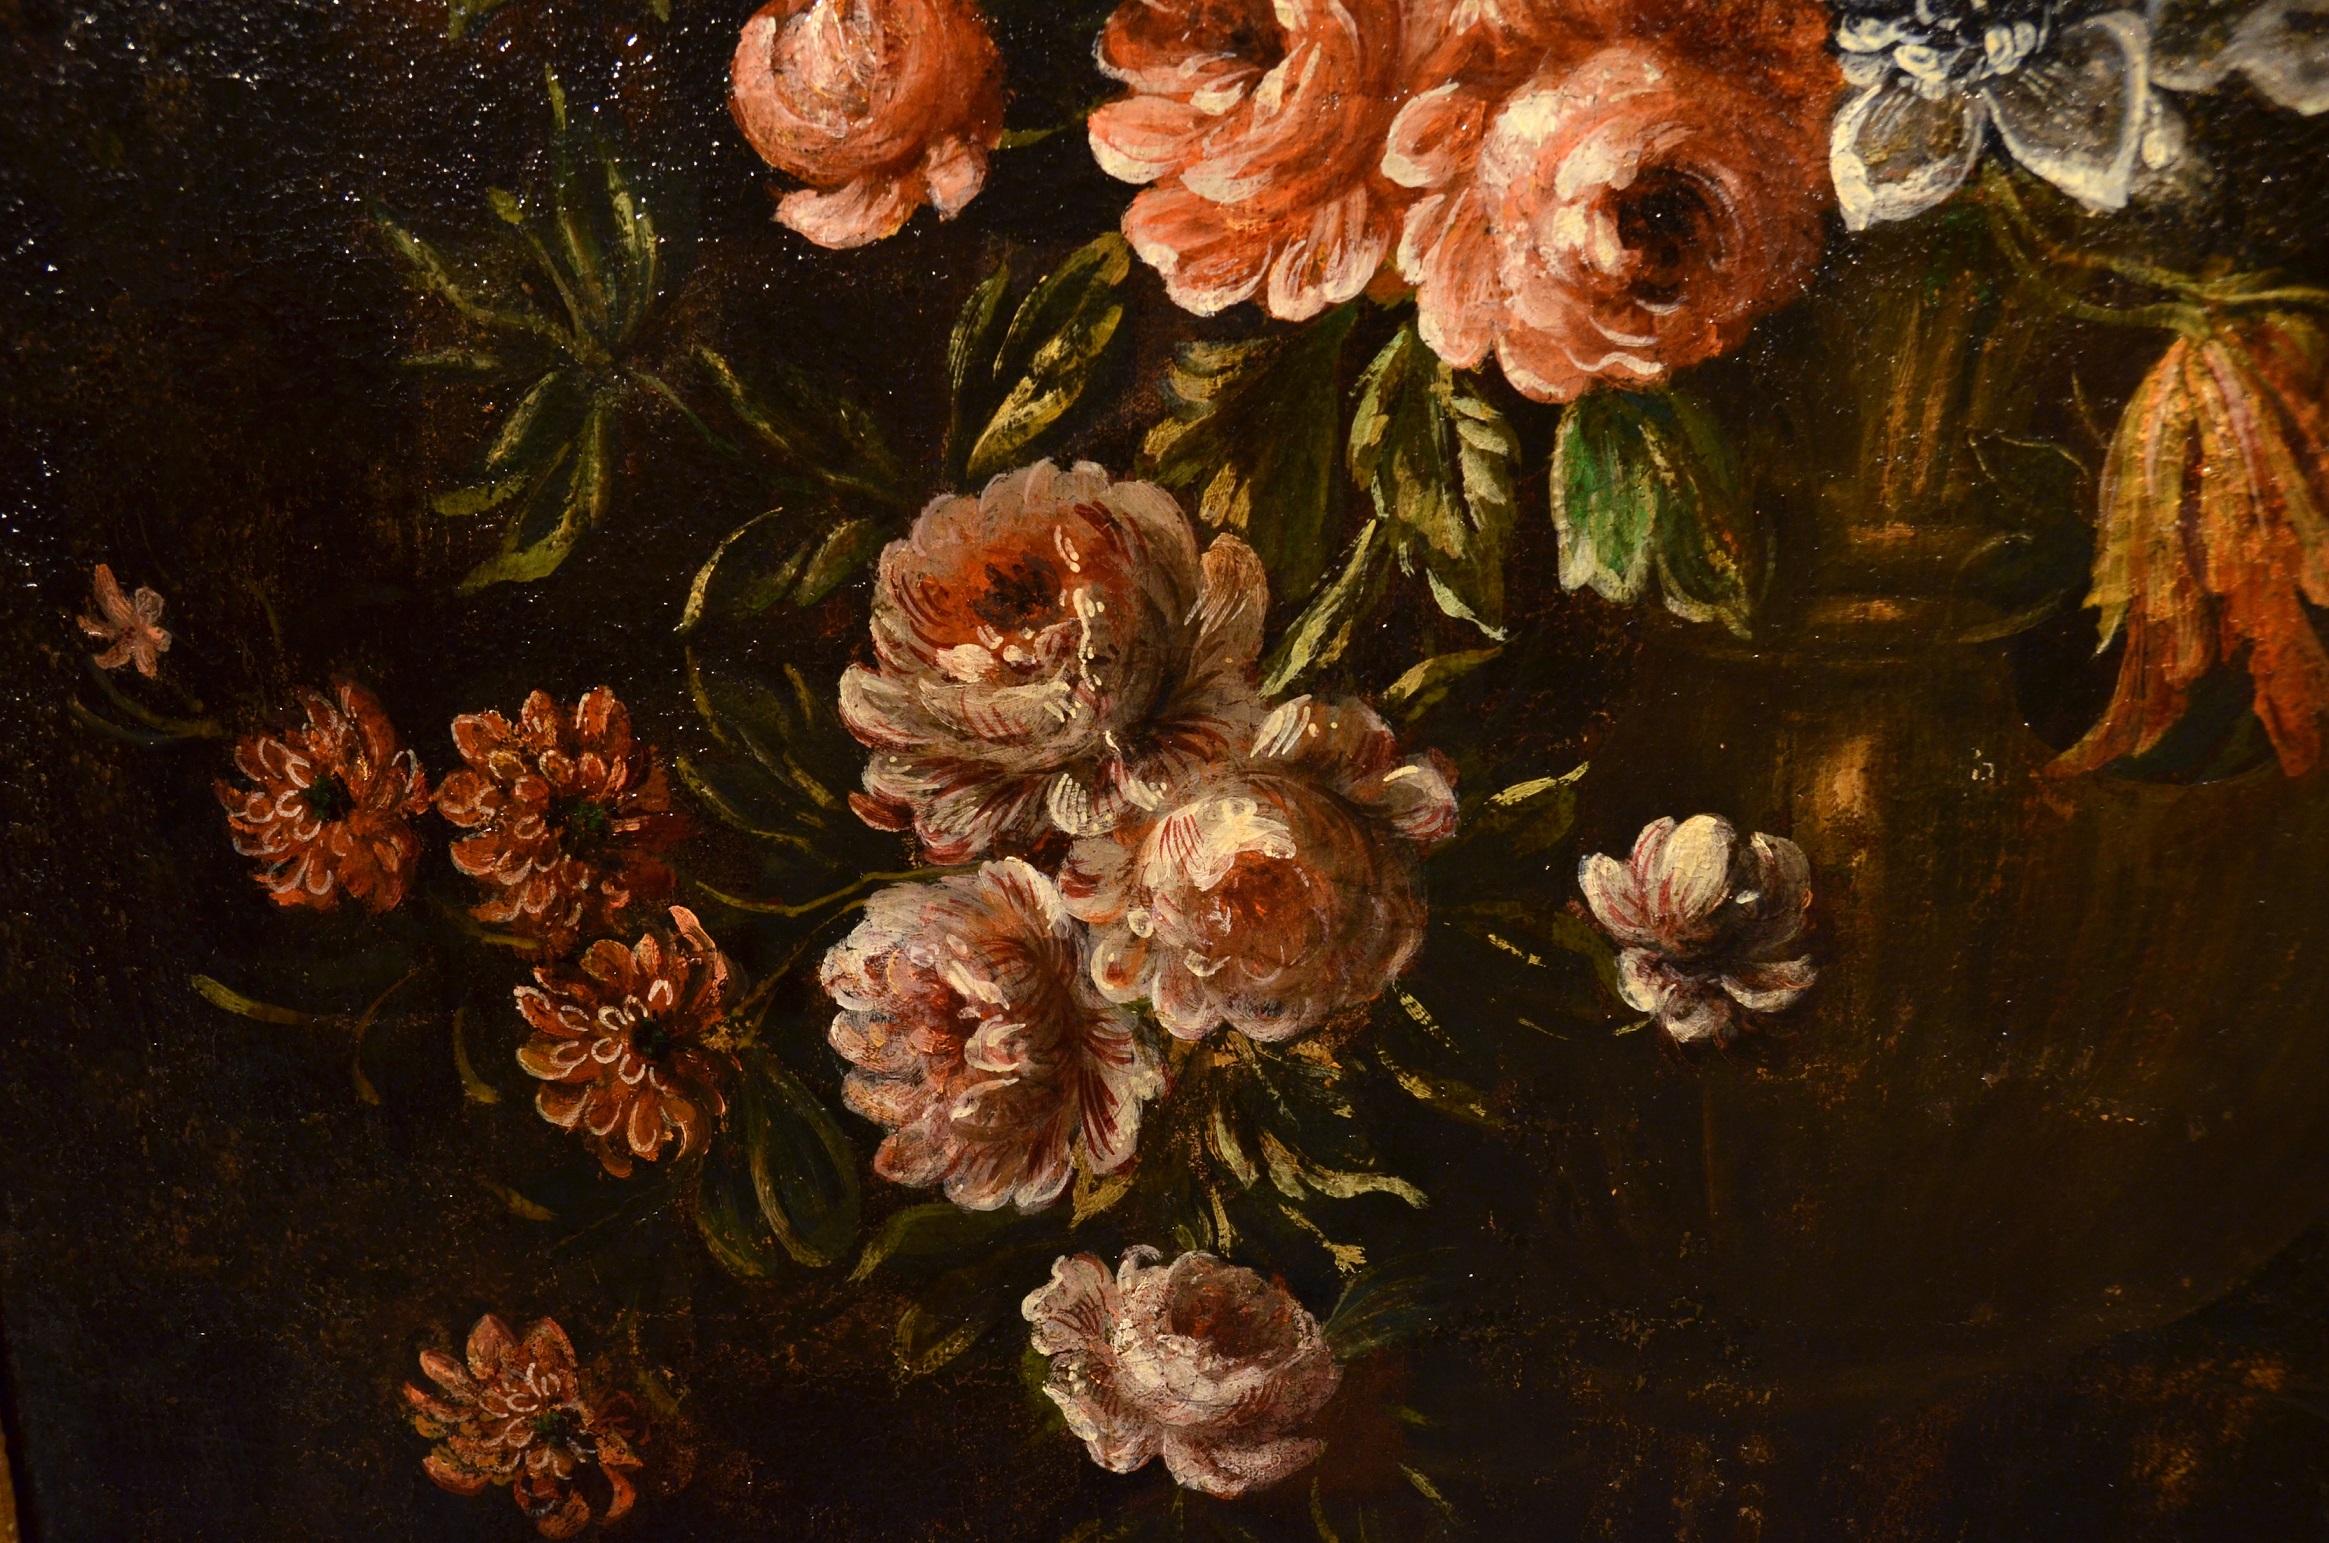 Flower Still Life Old Master 17th century Italy Paint Oil on canvas Quality Art - Brown Still-Life Painting by Felice Fortunato Biggi, known as Felice de 'Fiori (Parma 1650 - Verona 1700 ca.), cercle of